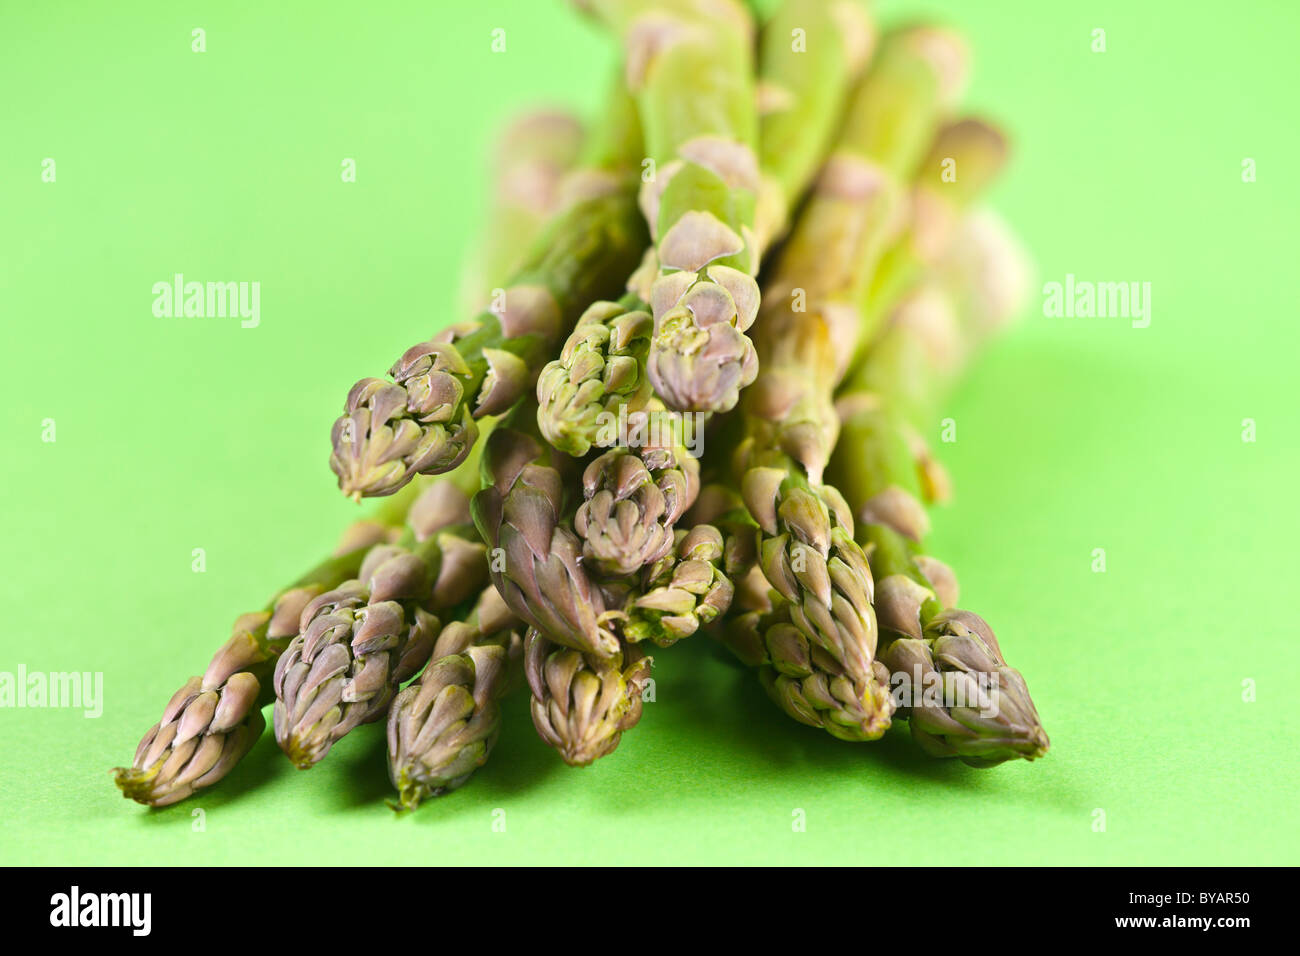 Eat your greens - fresh organic green asparagus tips and stems, raw cookery ingredient Stock Photo